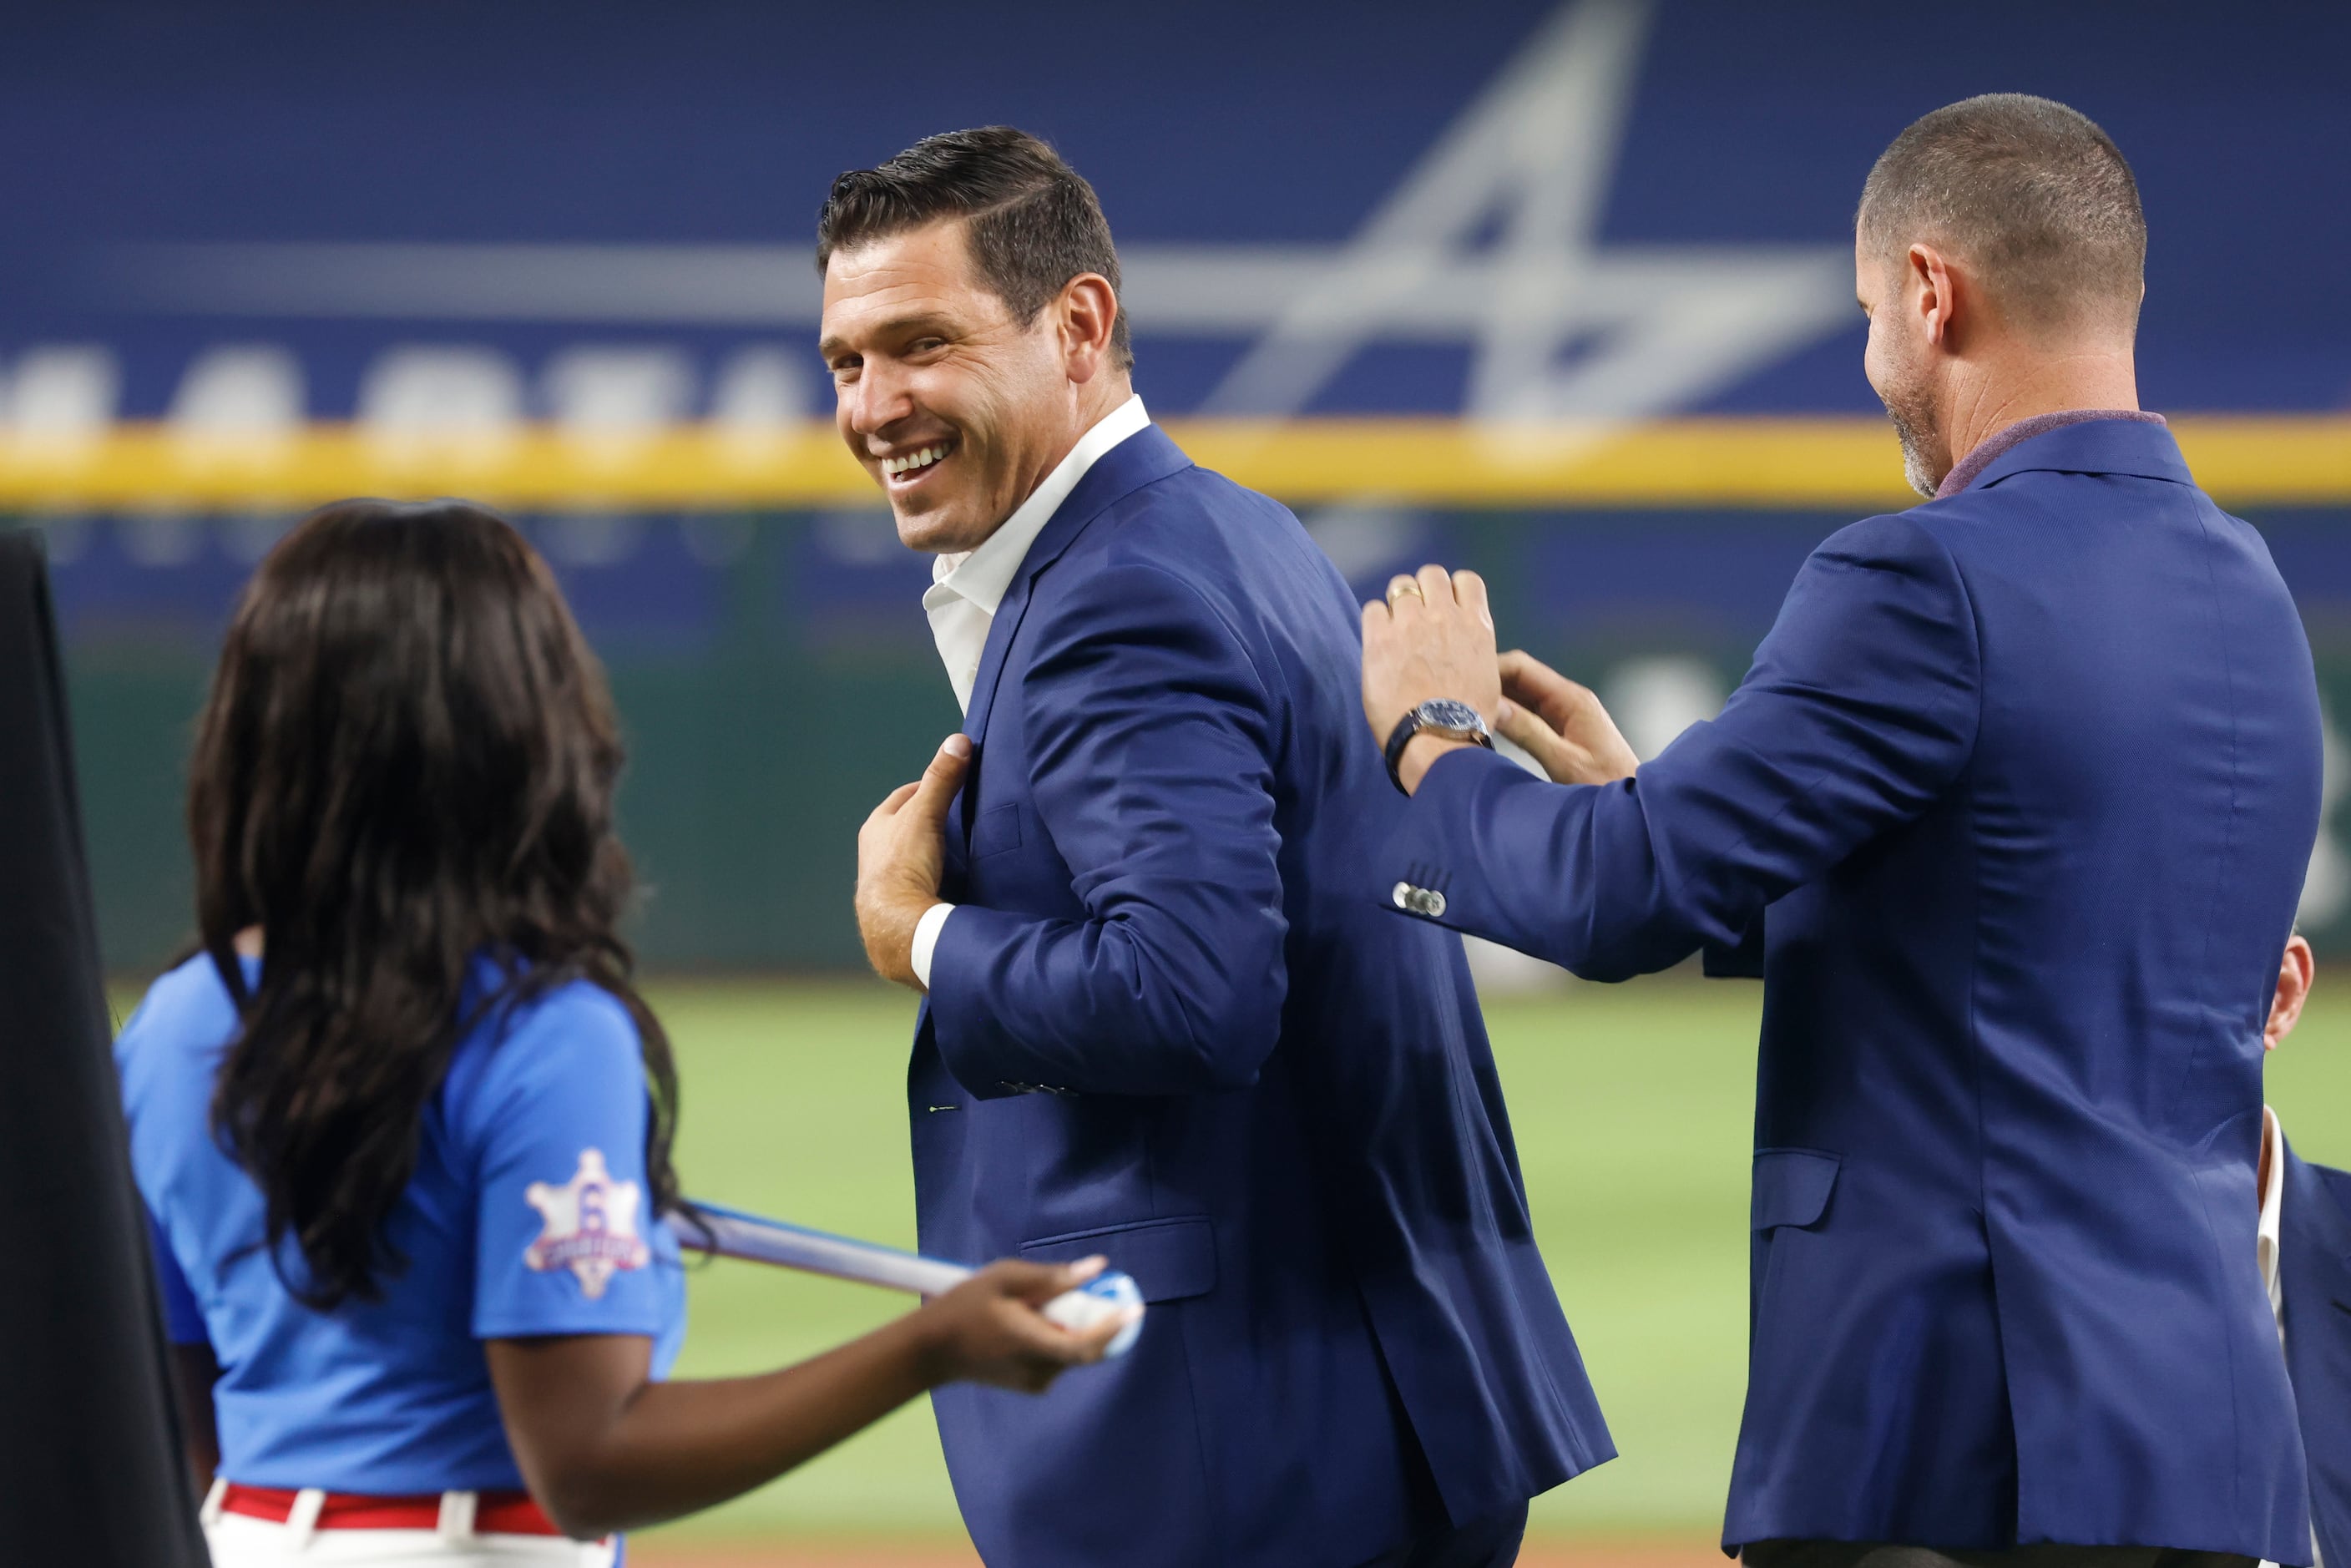 Ex-Rangers star throws out 1st pitch before Game 3 in Team Israel jersey